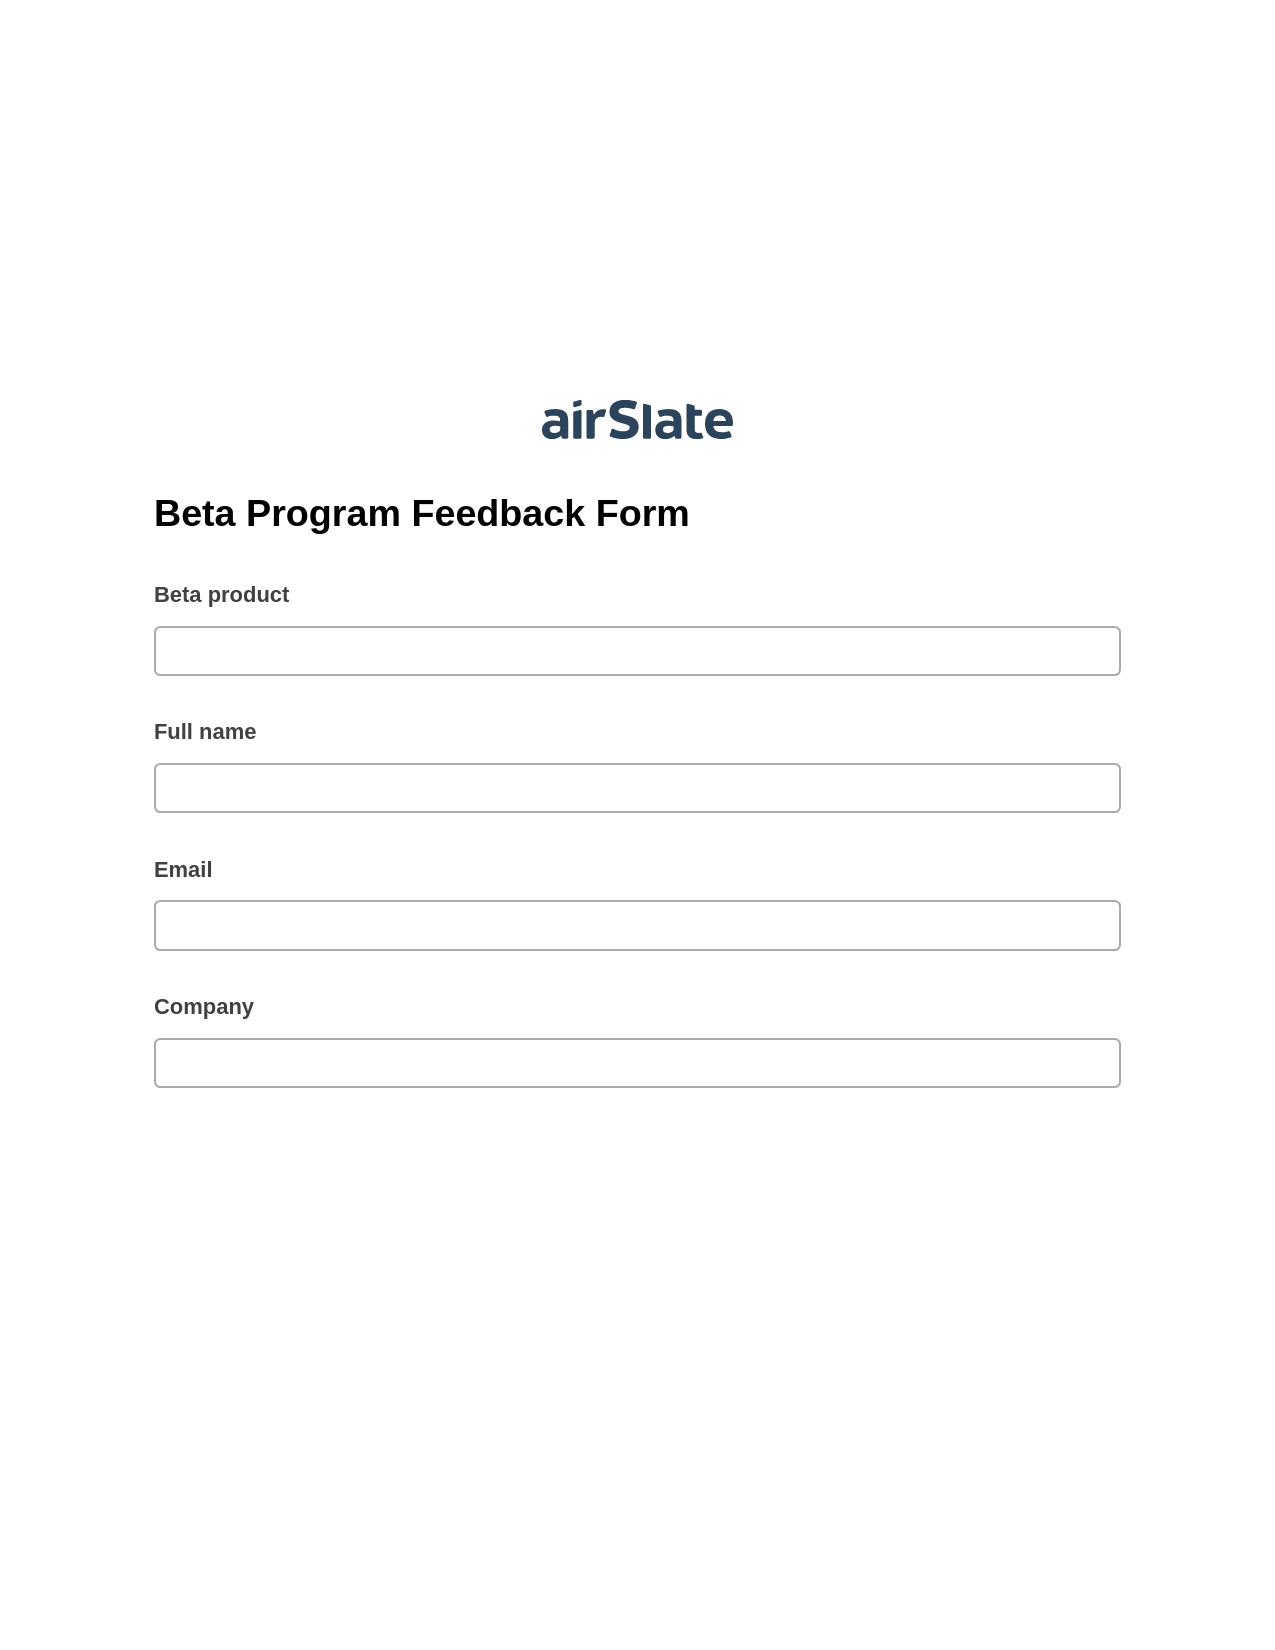 Multirole Beta Program Feedback Form Pre-fill from Litmos bot, Lock the slate bot, Export to Formstack Documents Bot